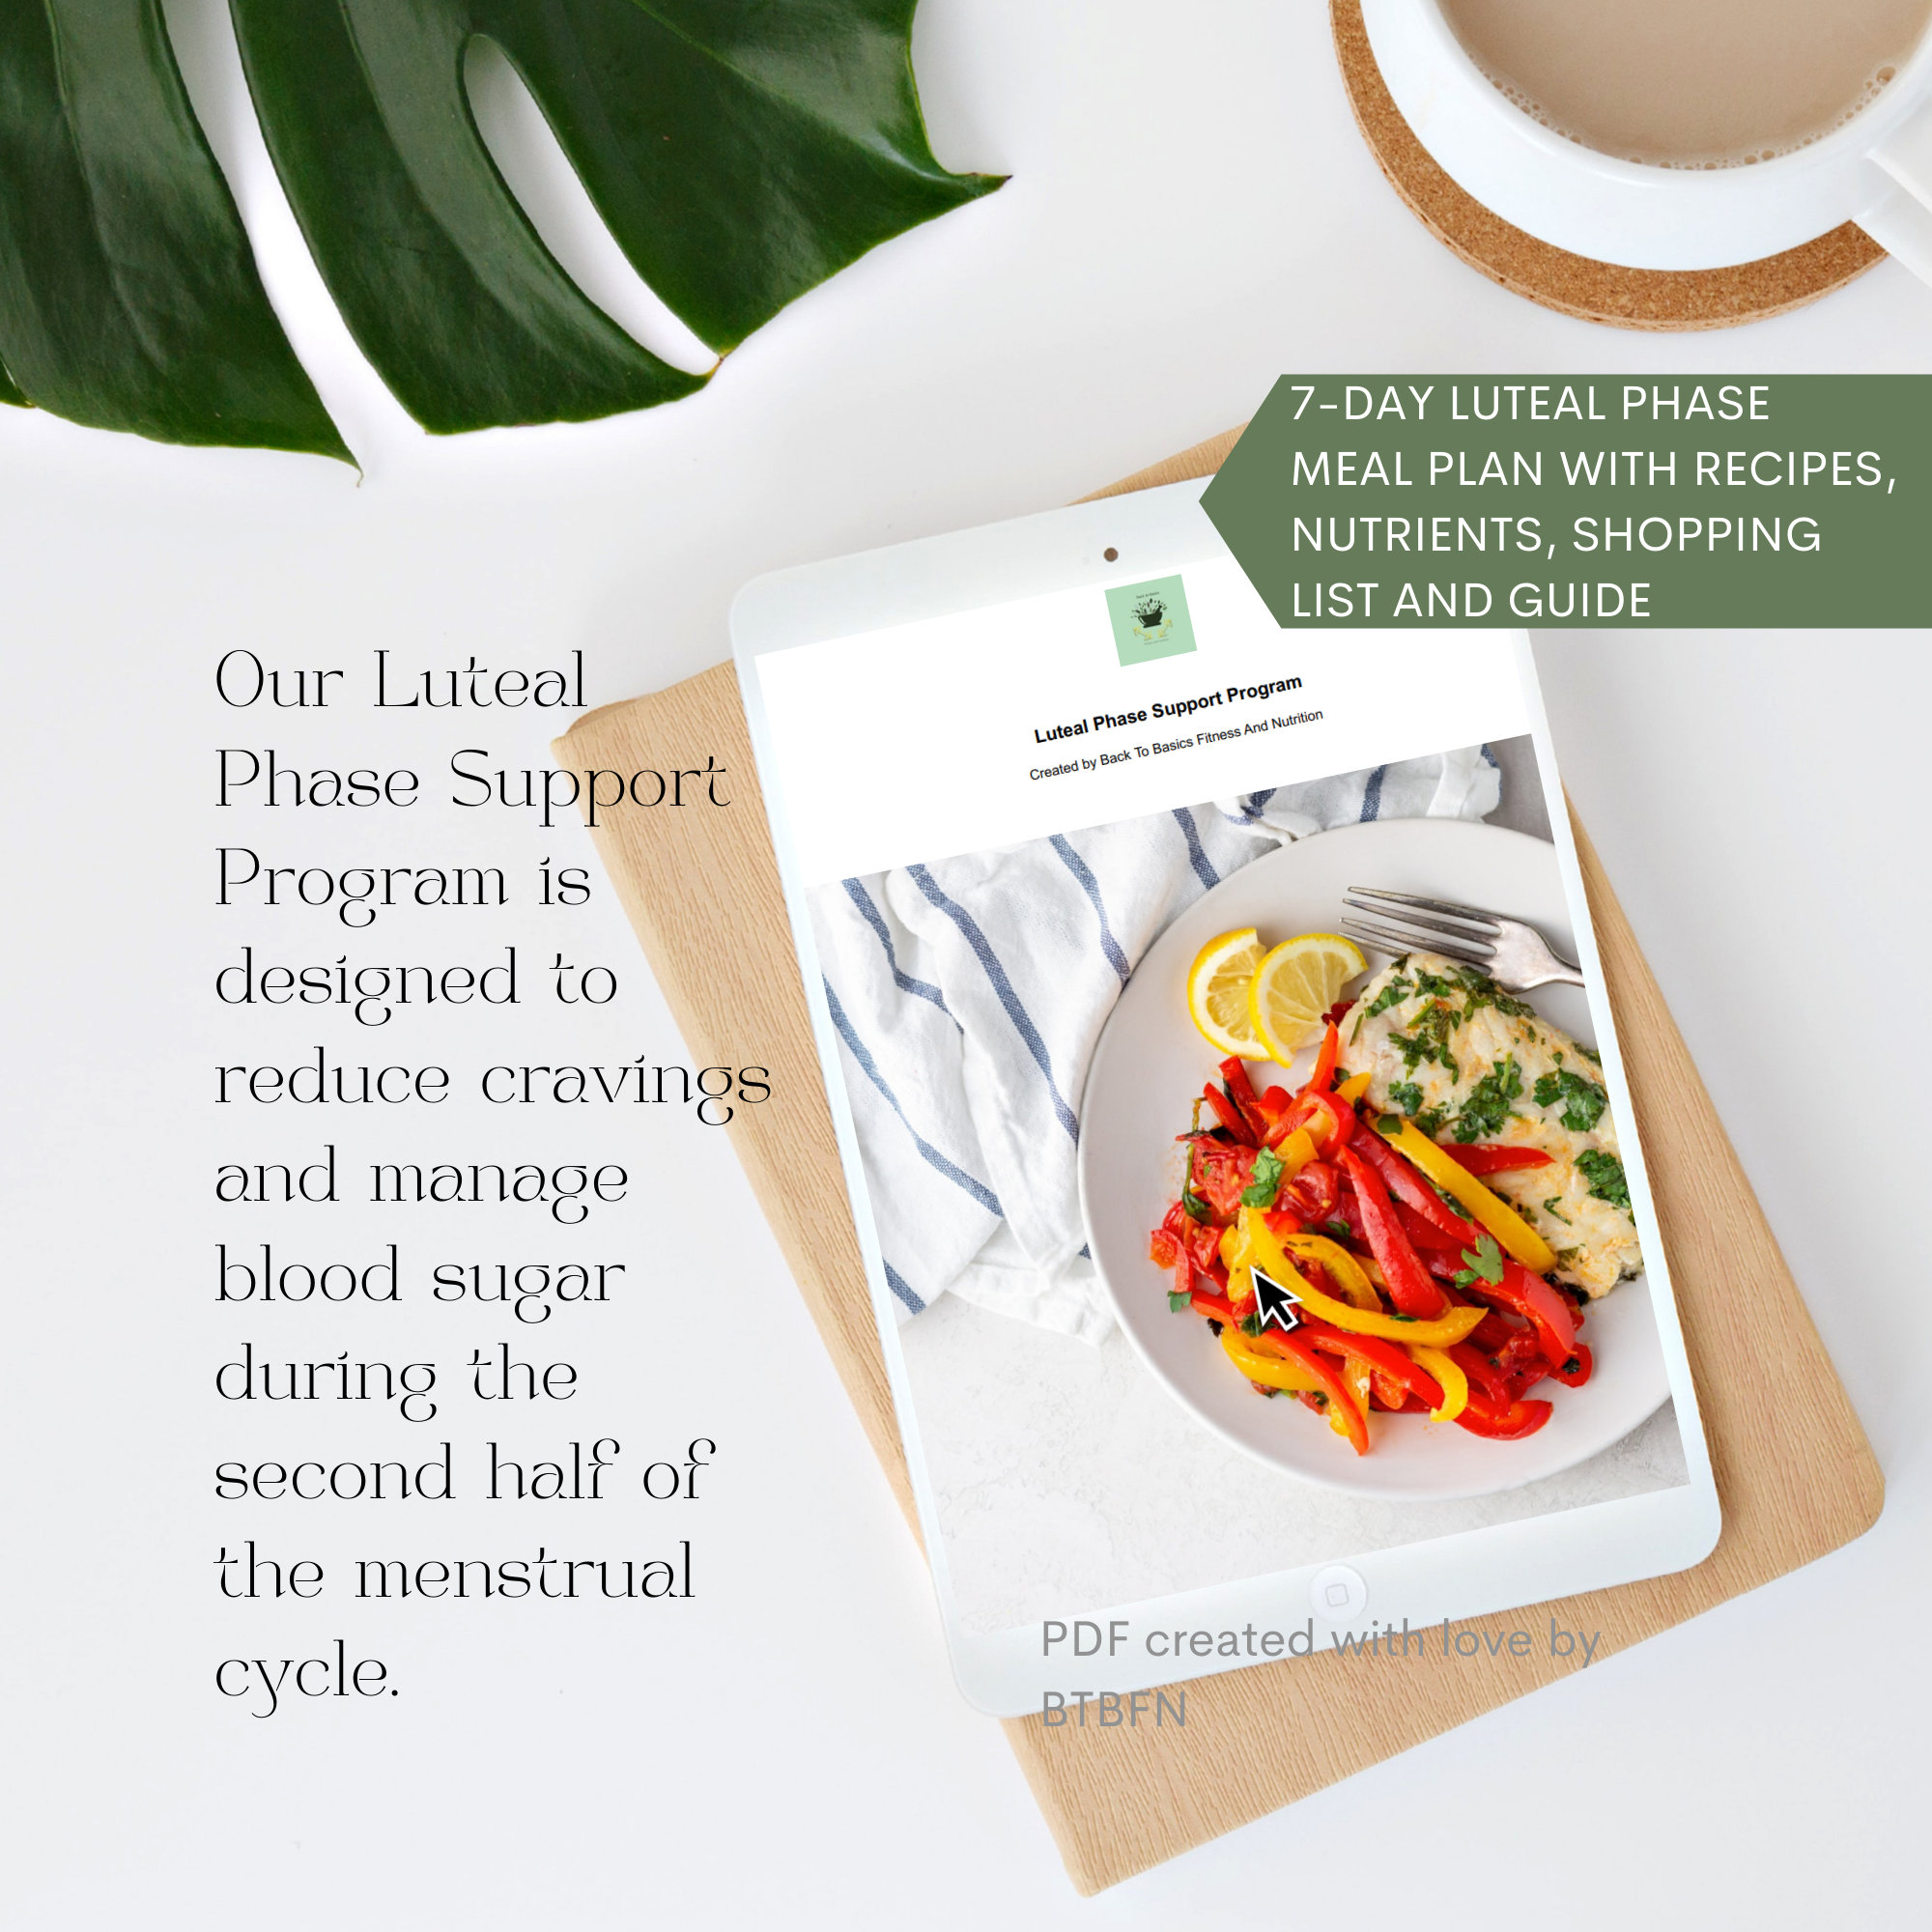 7-day Luteal Phase Meal Plan 